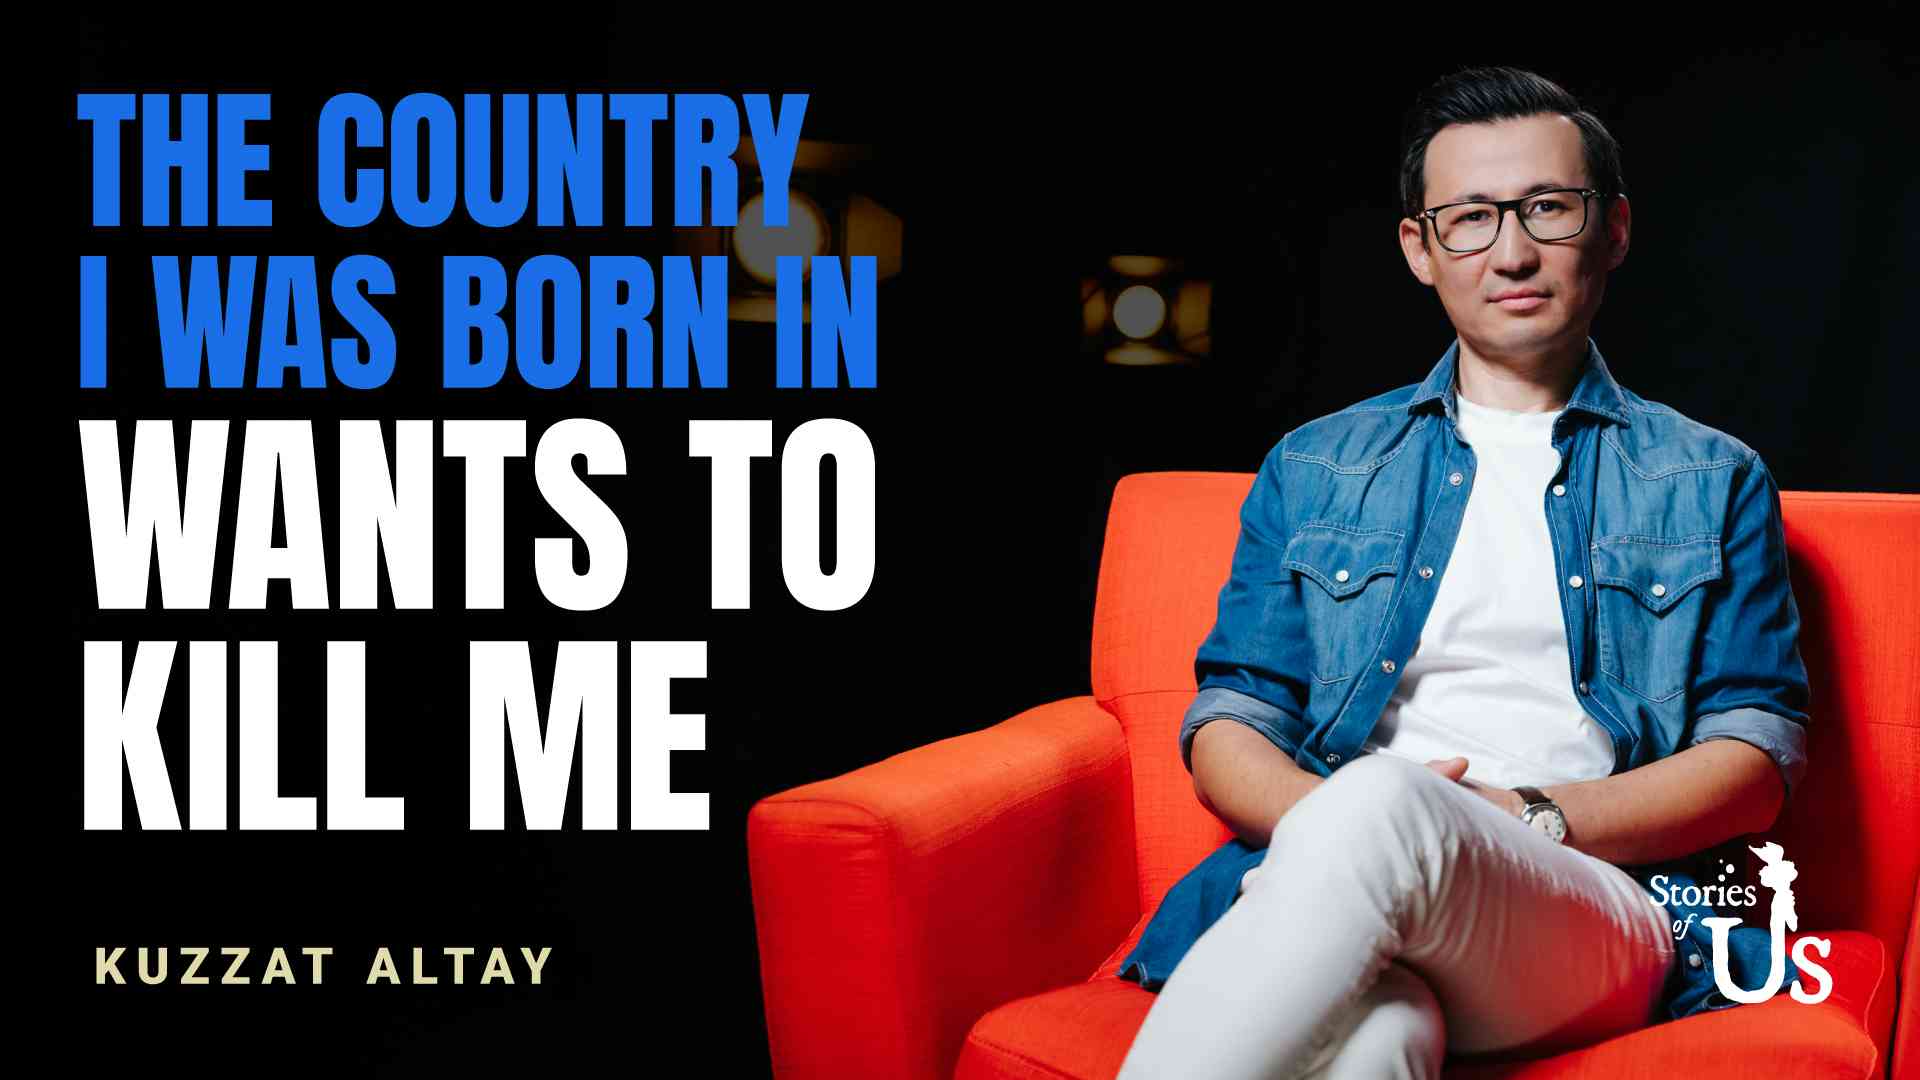 Kuzzat Altay: The Country I Was Born in Wants to Kill Me